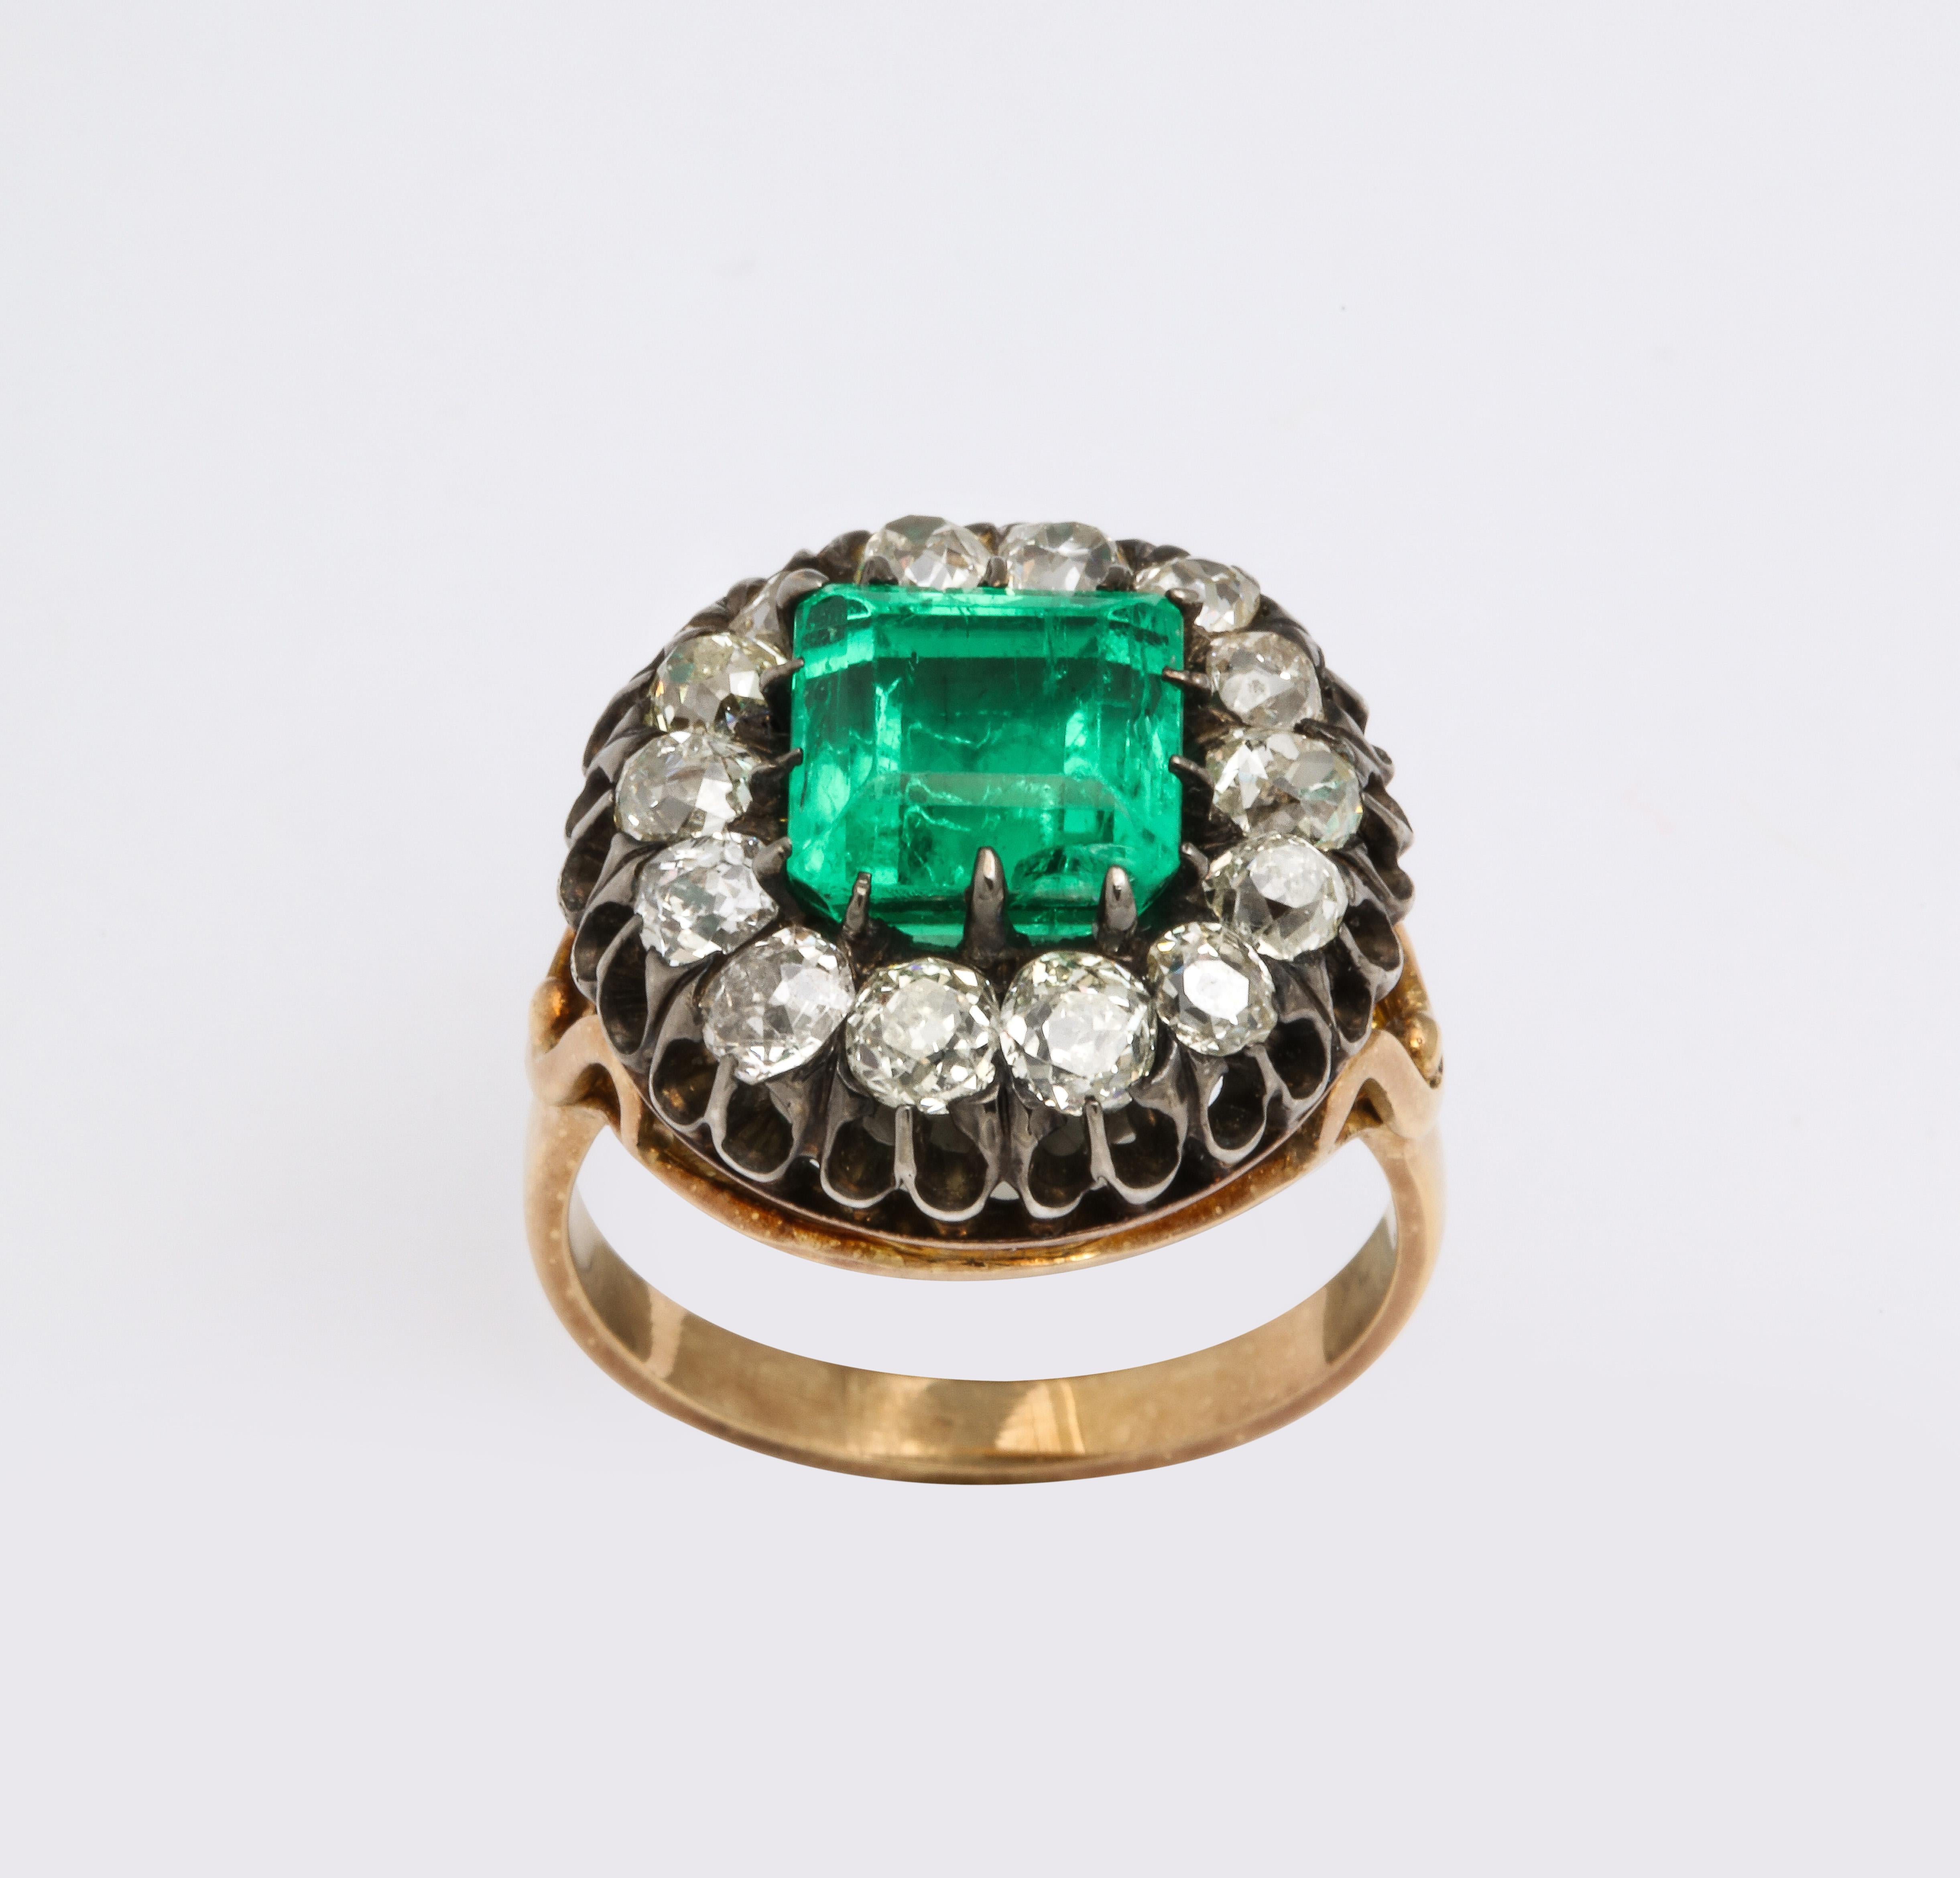 Old Mine Cut Antique Square Cut Emerald and Old Mine Diamond Ring GIA Certified